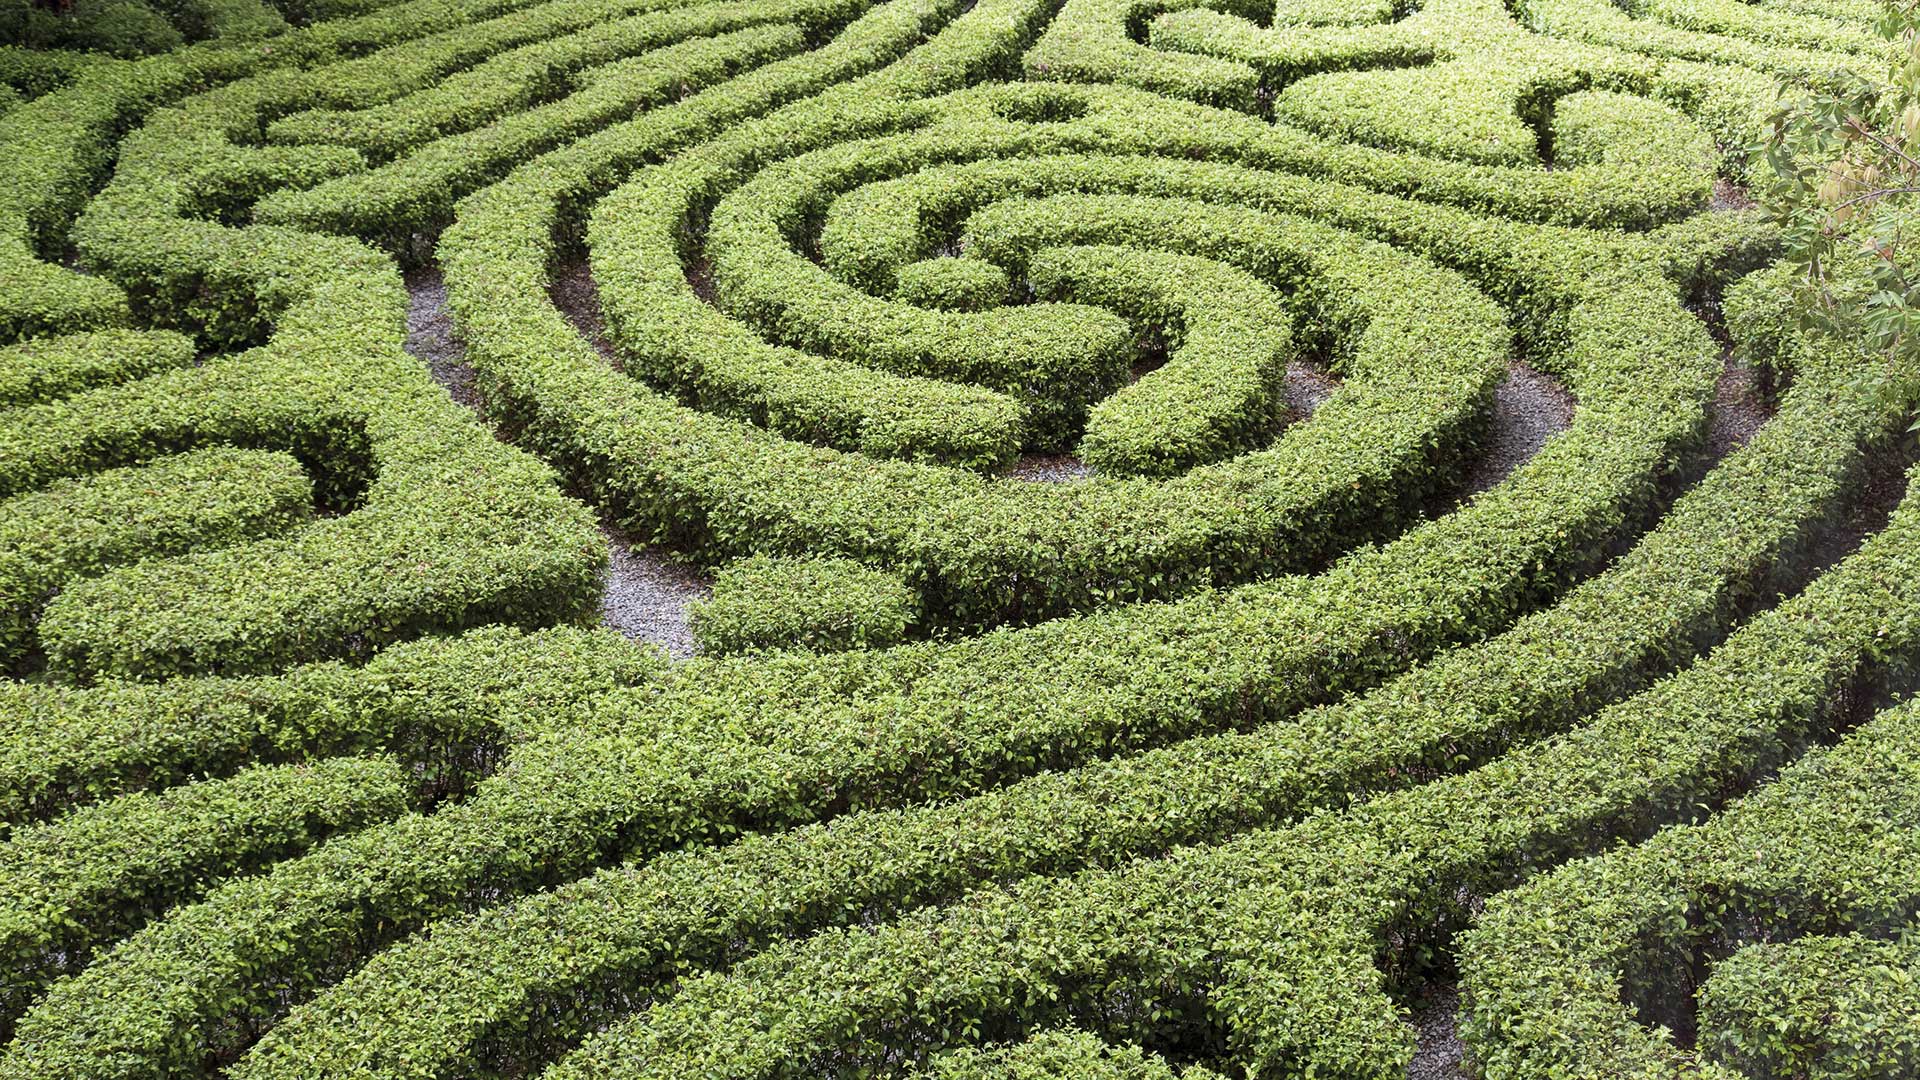 Ornamental maze made out of cut bushes